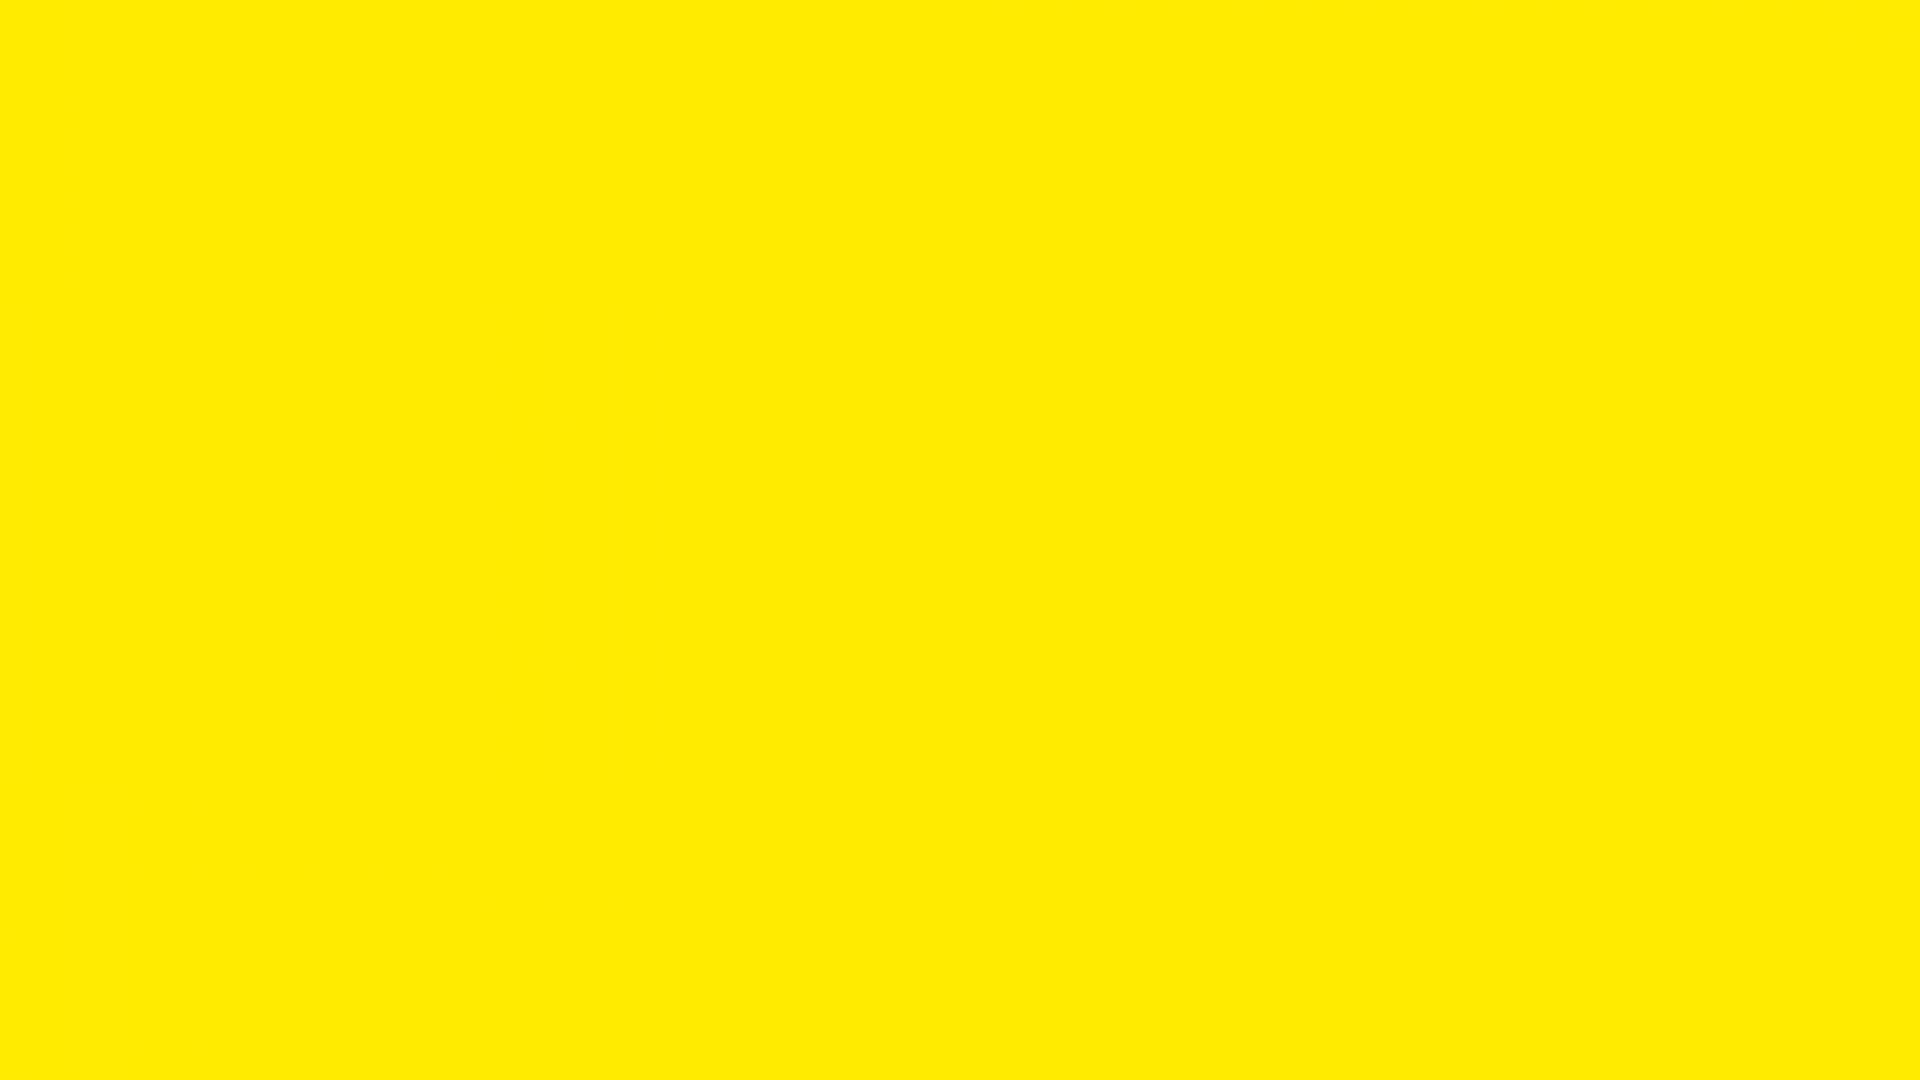 Plain Yellow Wallpaper with image resolution 1920x1080 pixel. You can use this wallpaper as background for your desktop Computer Screensavers, Android or iPhone smartphones